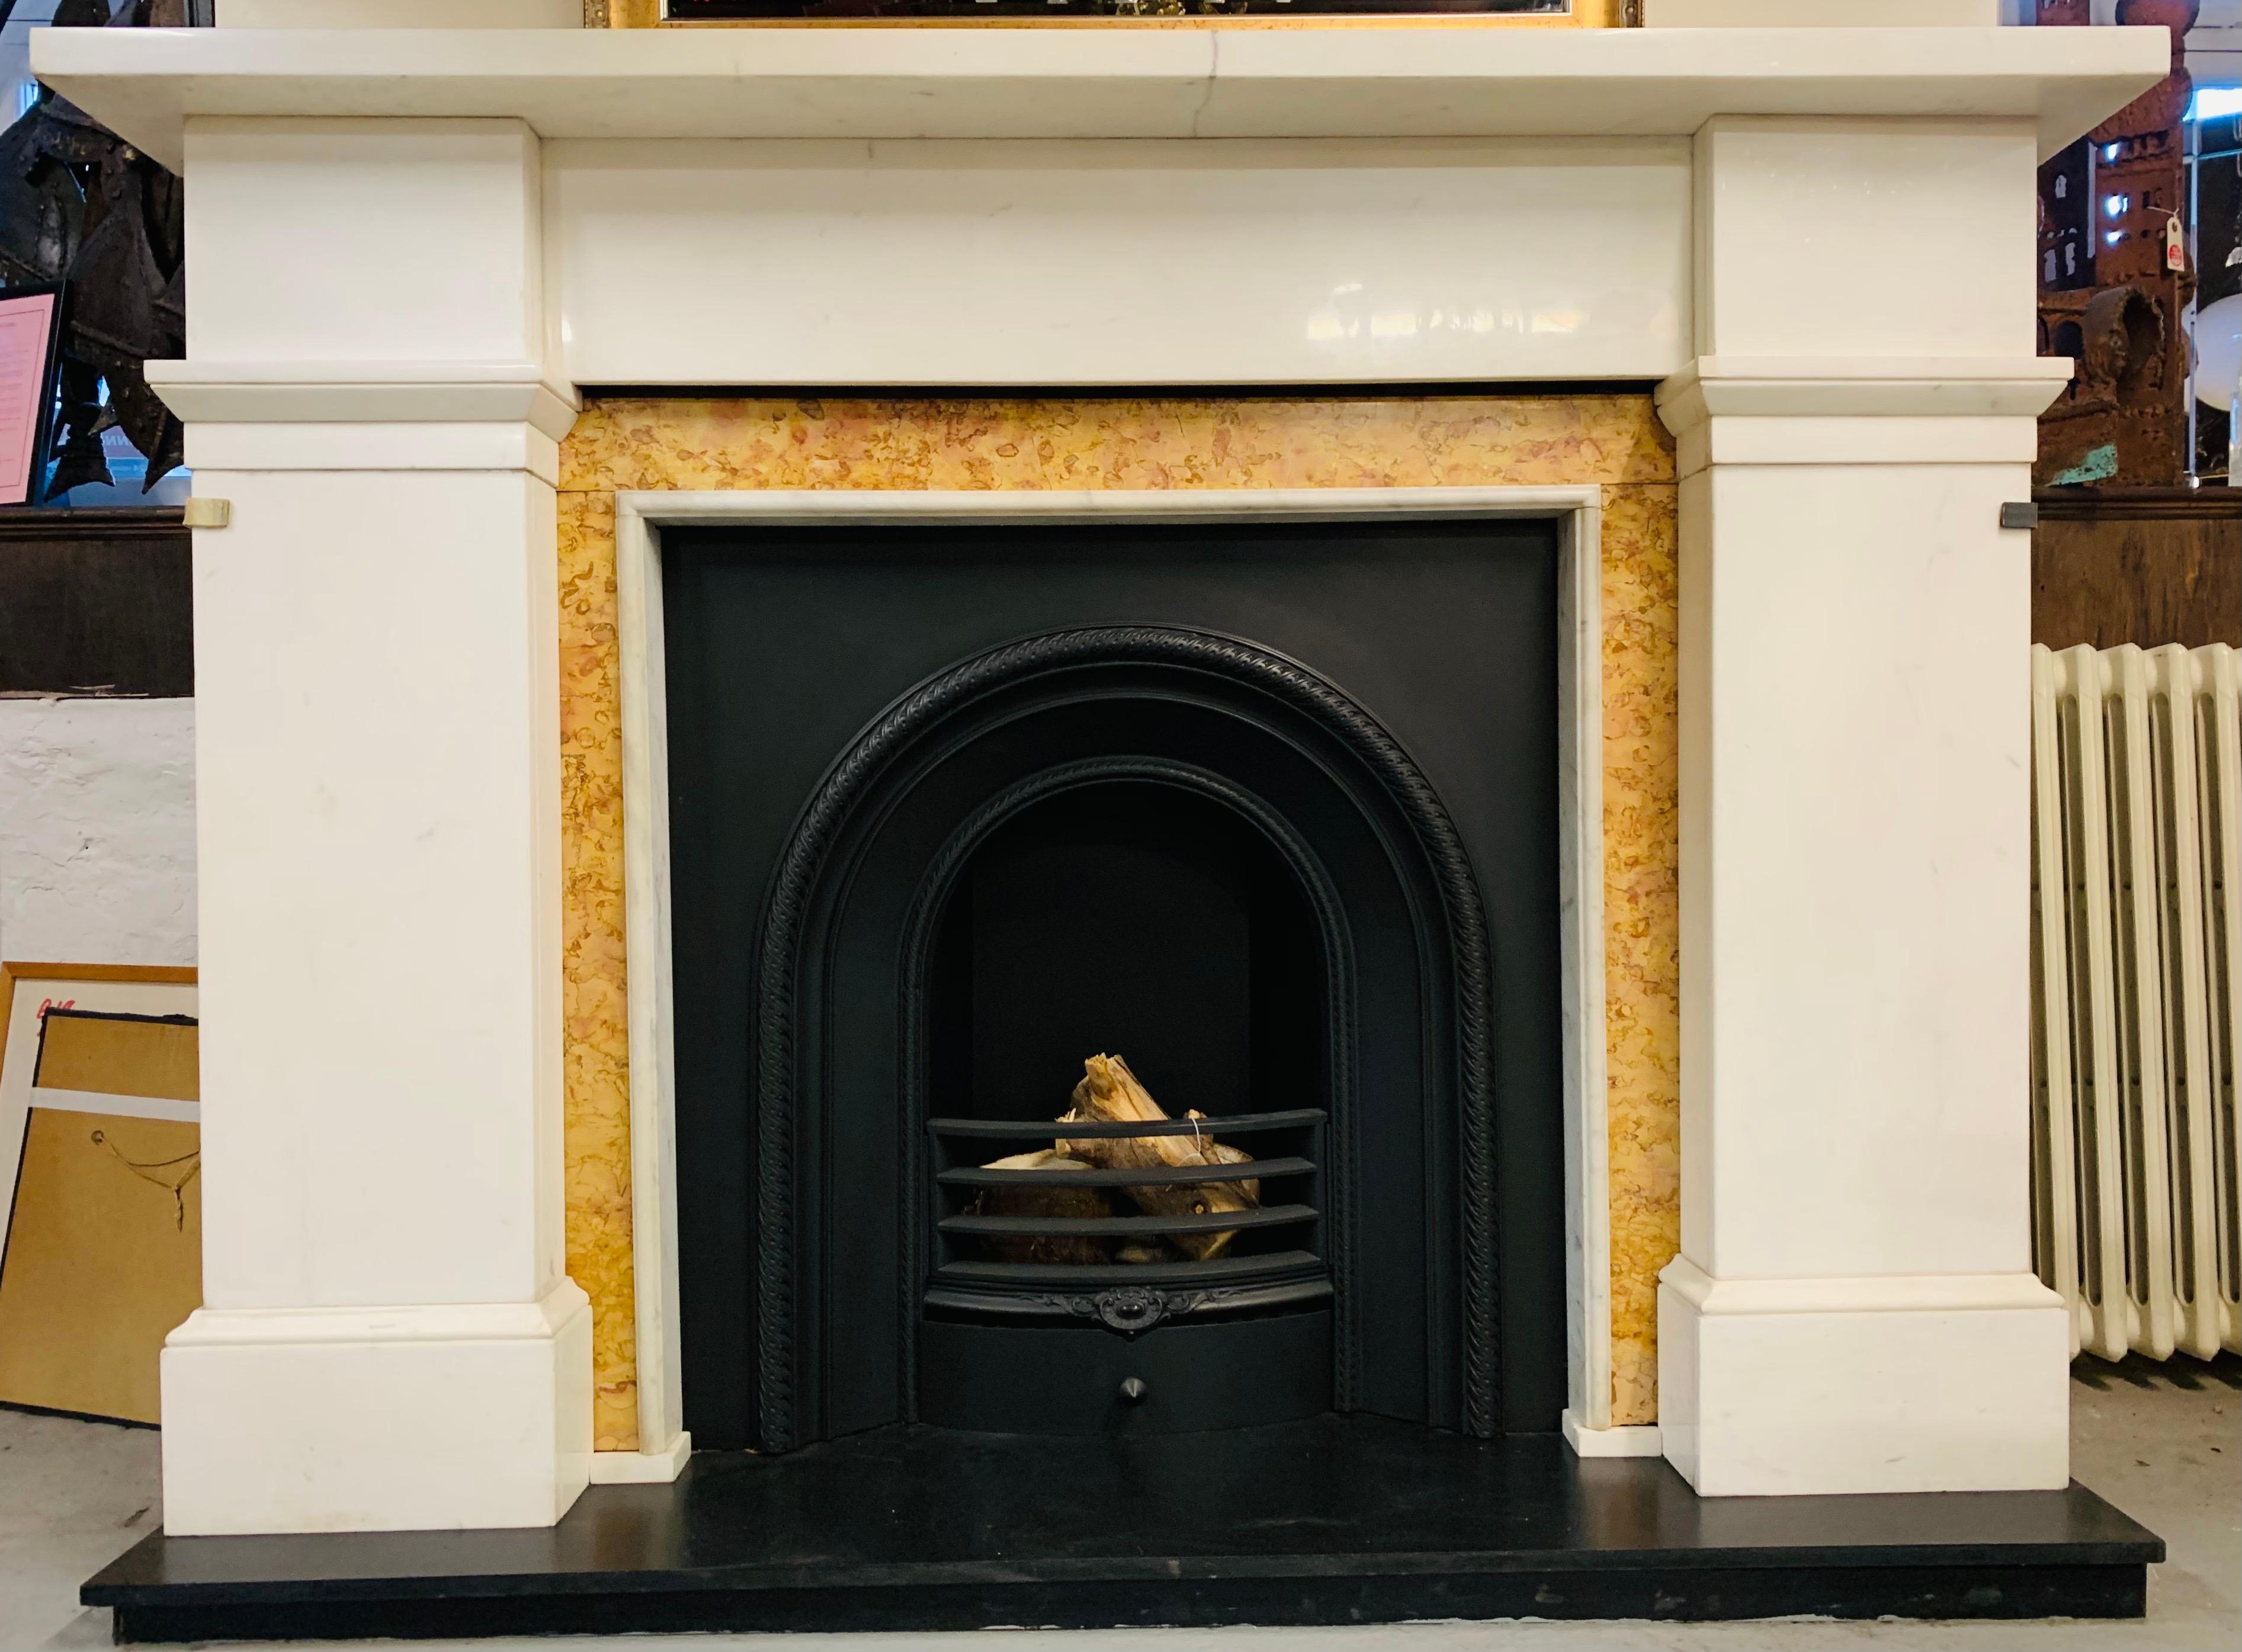 A very large and beautiful Scottish statuary marble fireplace surround in a typical Edinburgh design with later Sienna marble ingroungs -complete with a rich heritage. A large and generous shelf sits above an unadorned frieze, flanked by large jambs